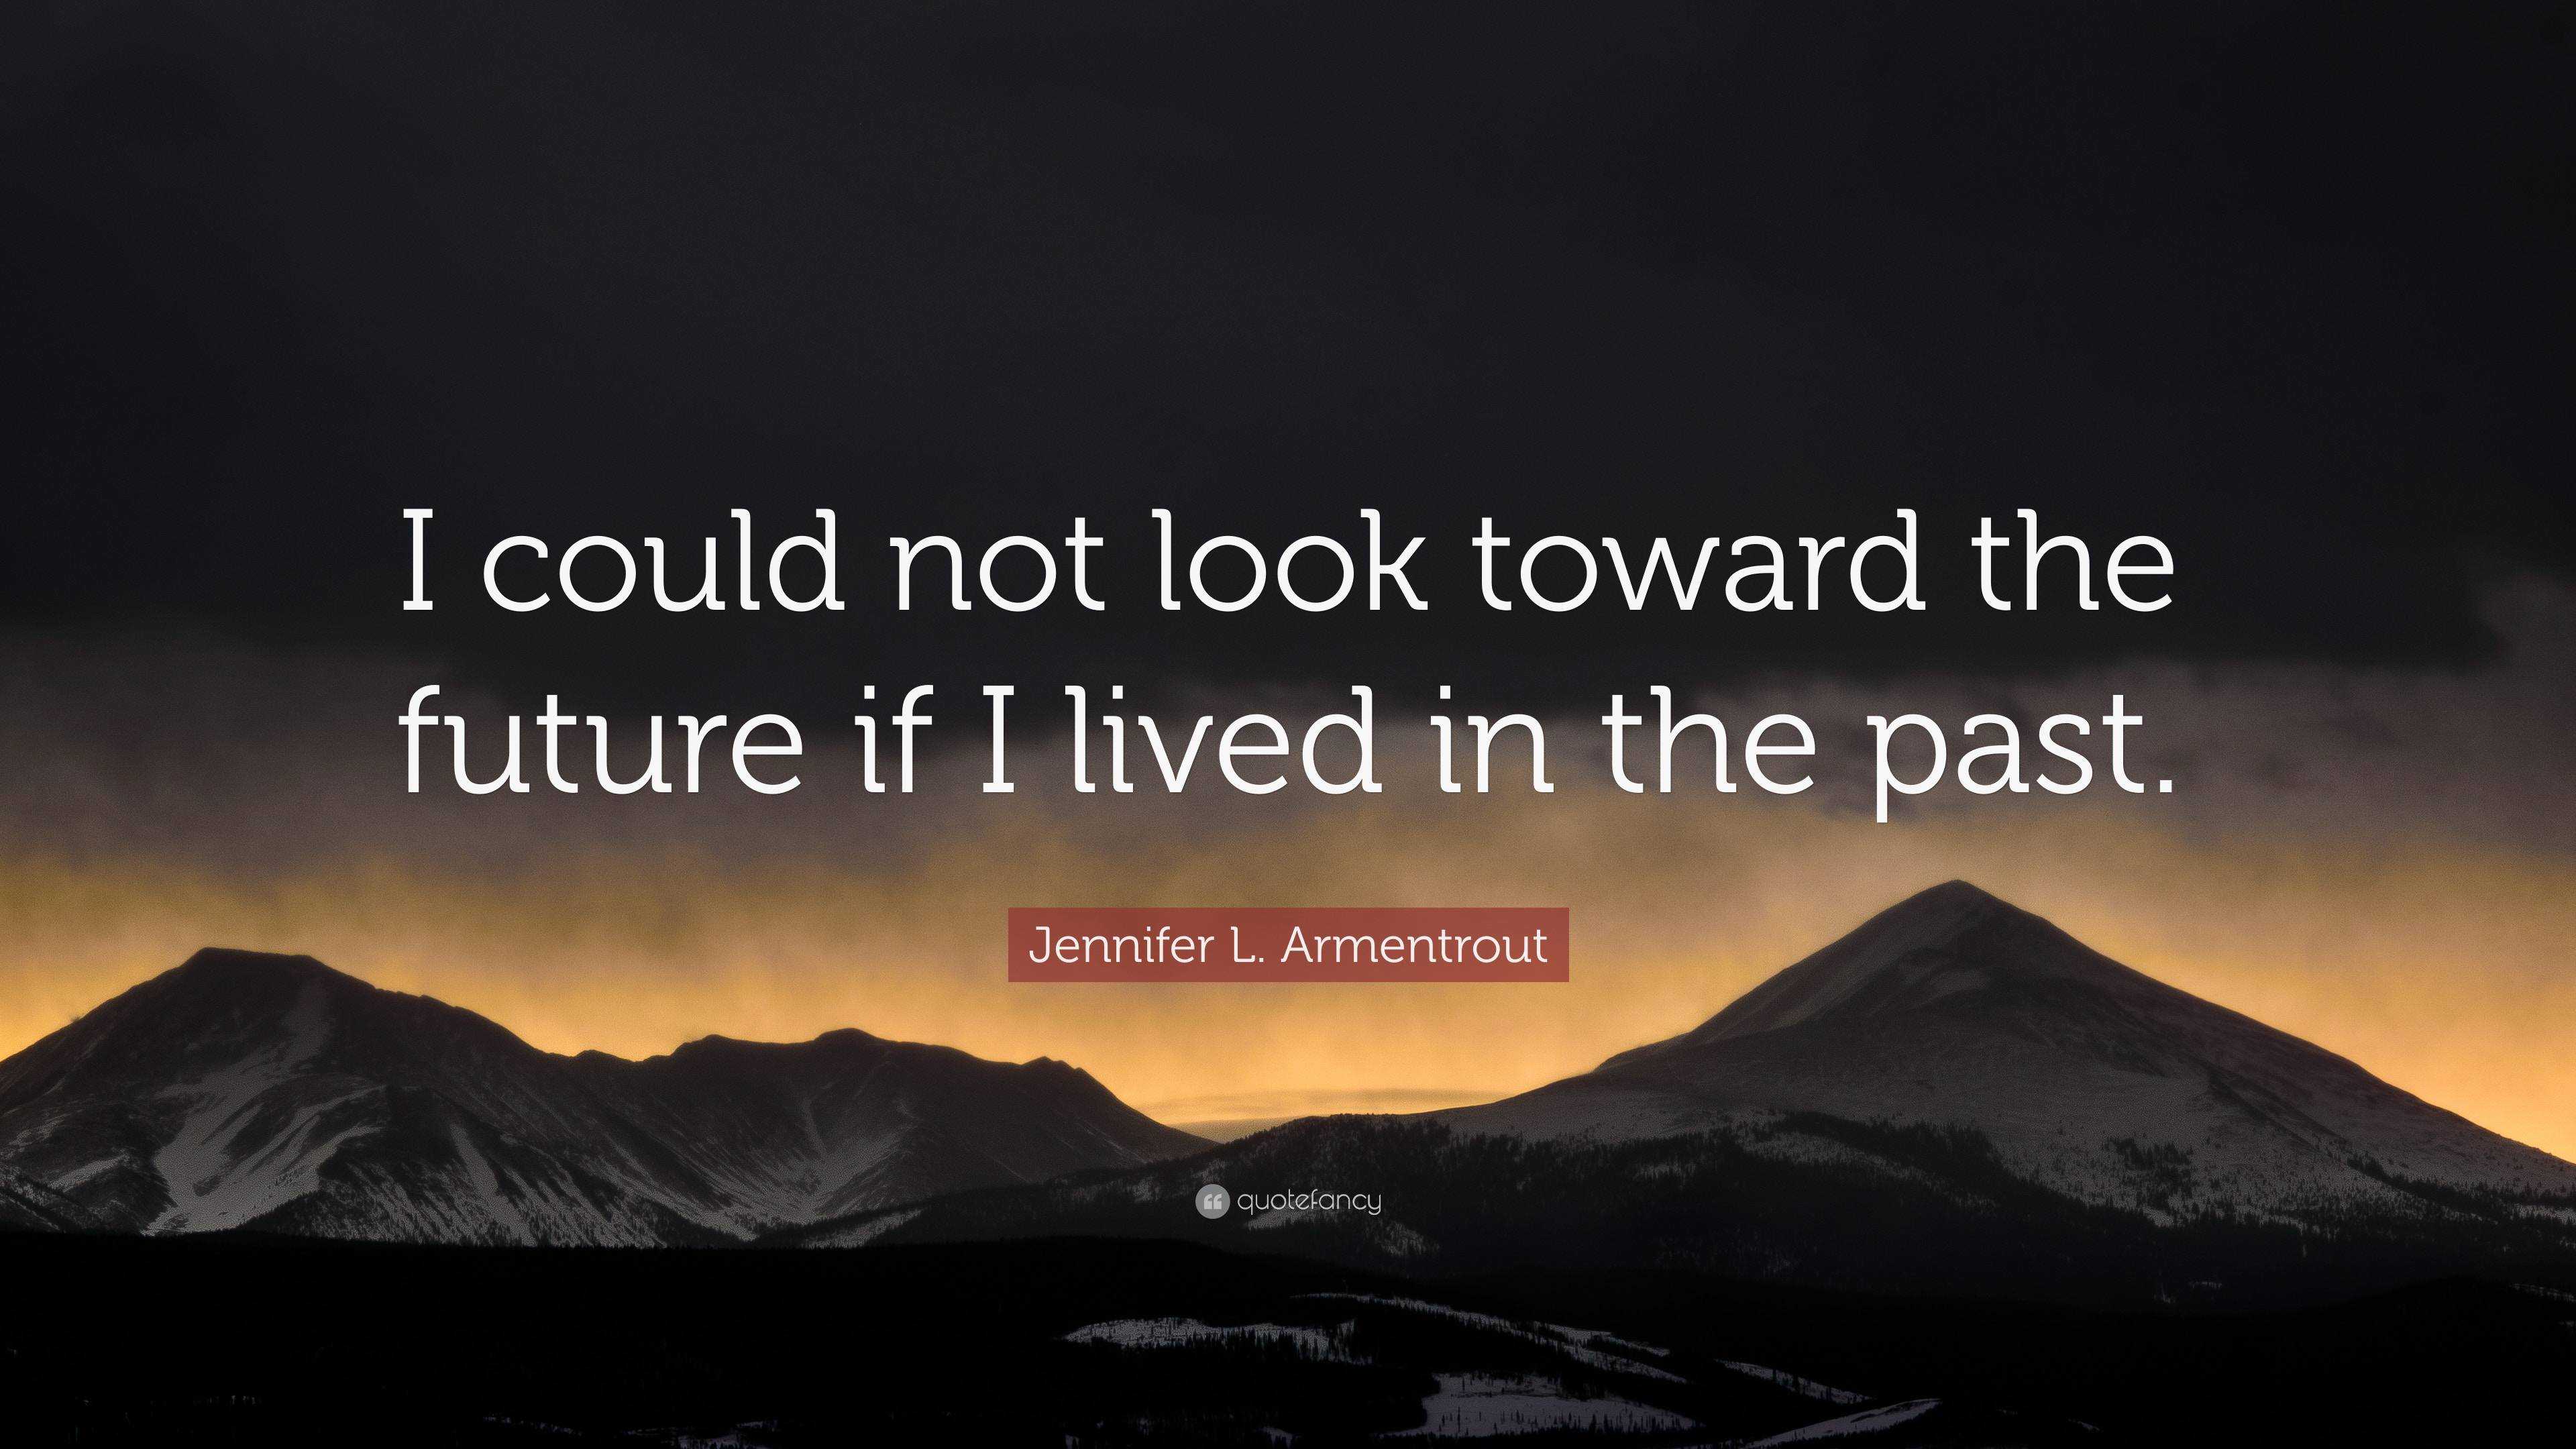 Jennifer L. Armentrout Quote: “I could not look toward the future if I ...